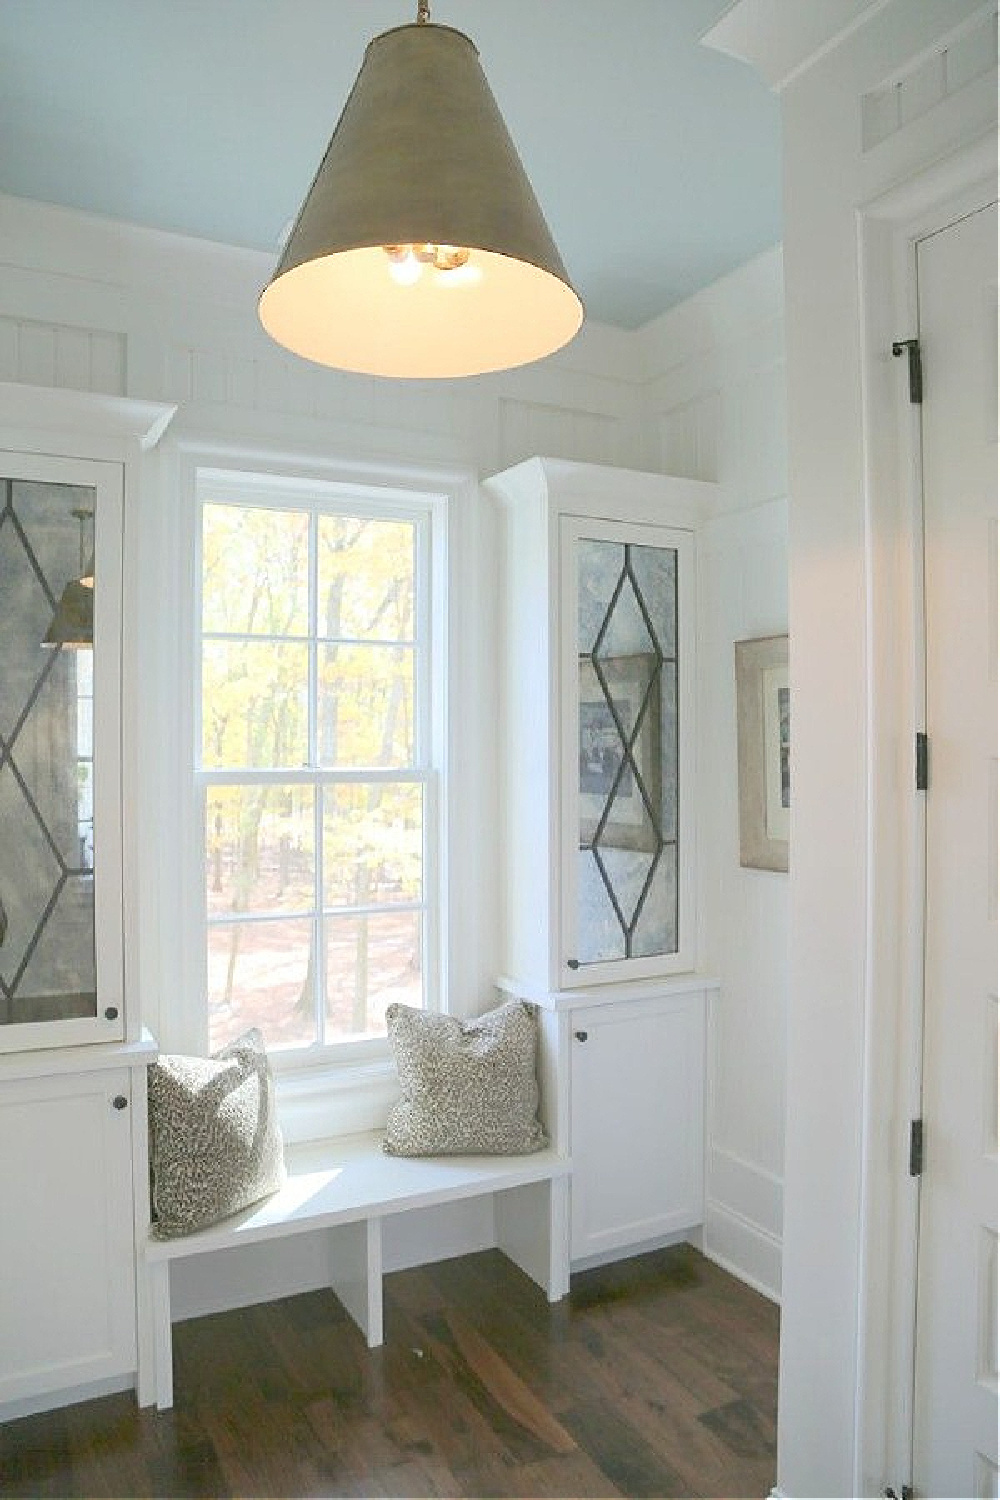 SHERWIN WILLIAMS Rainwashed on ceiling of Southern Living Showcase mud room. Photo: The Decorologist.